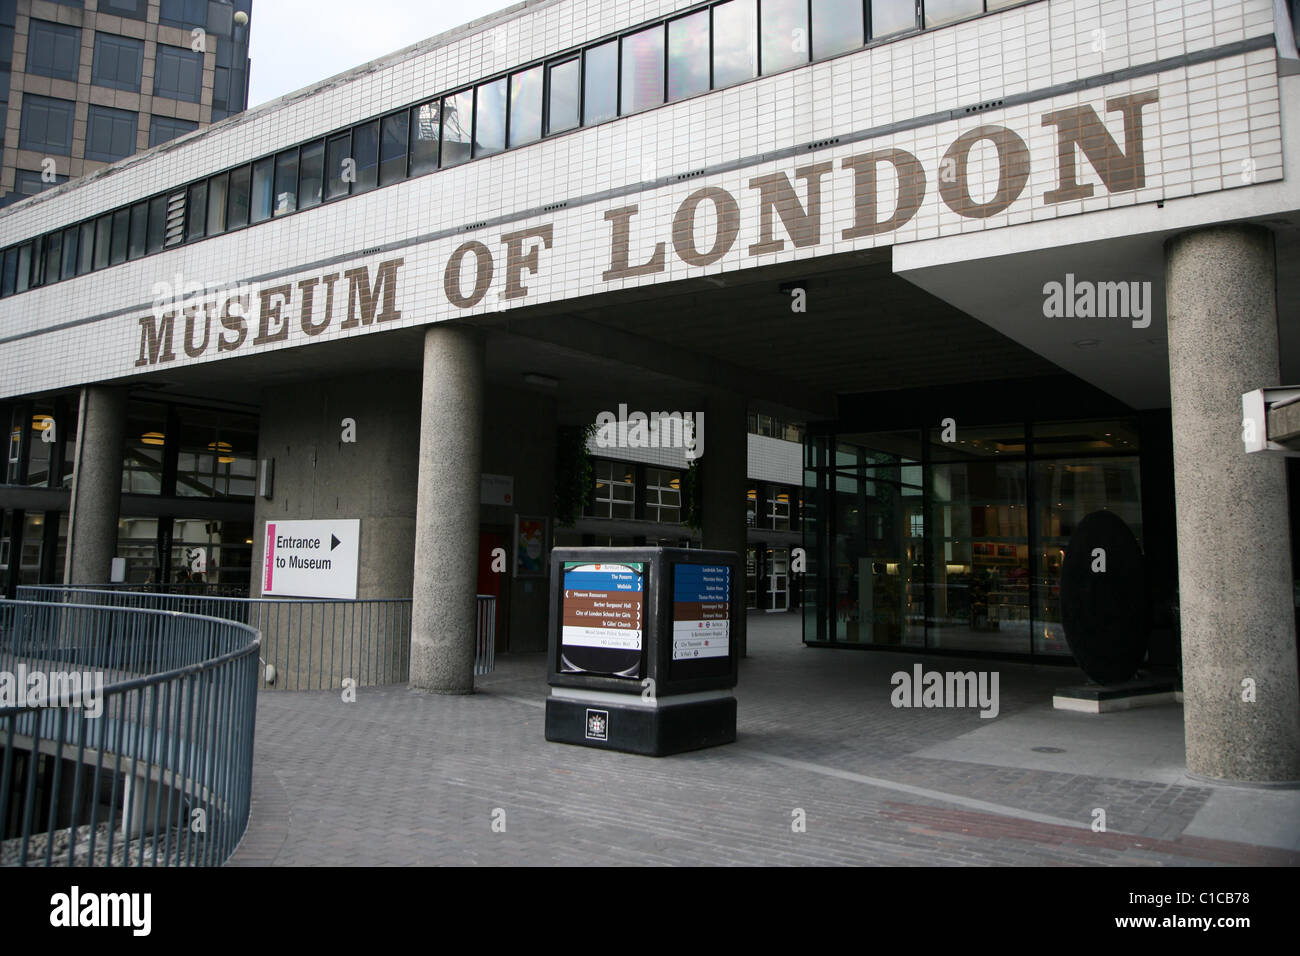 General View gv of the Museum of London in London, England. Stock Photo